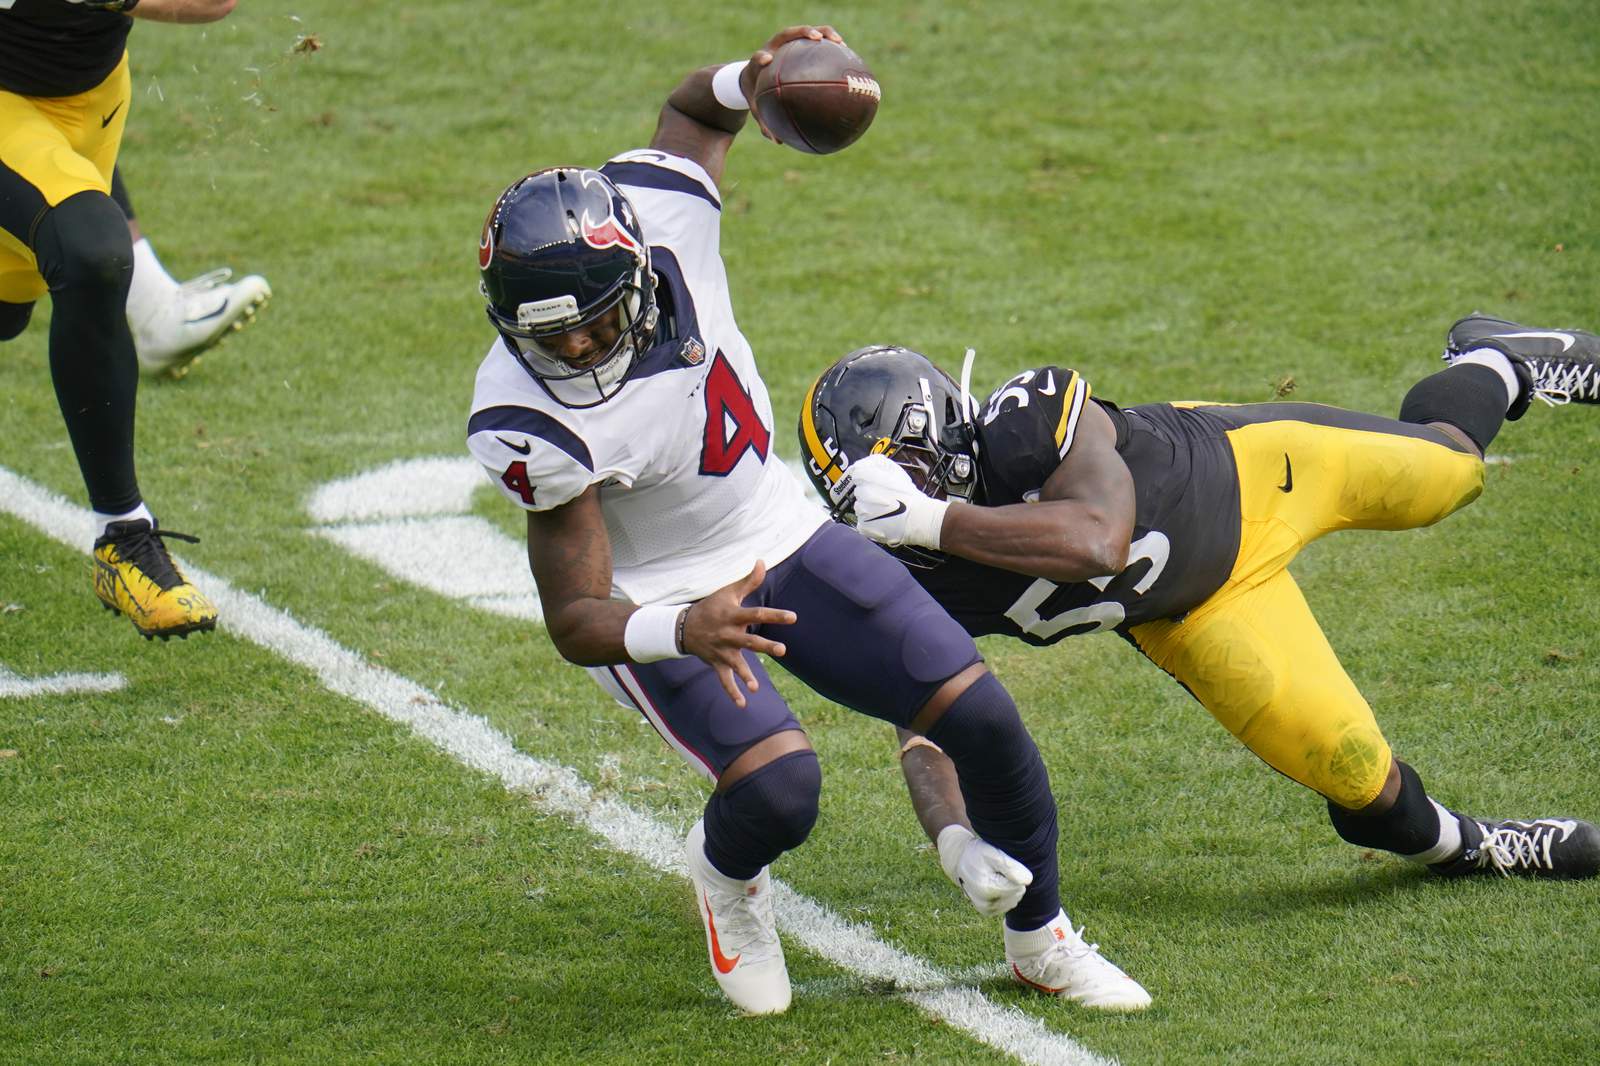 Here are 3 reasons on why the Texans are winless this season